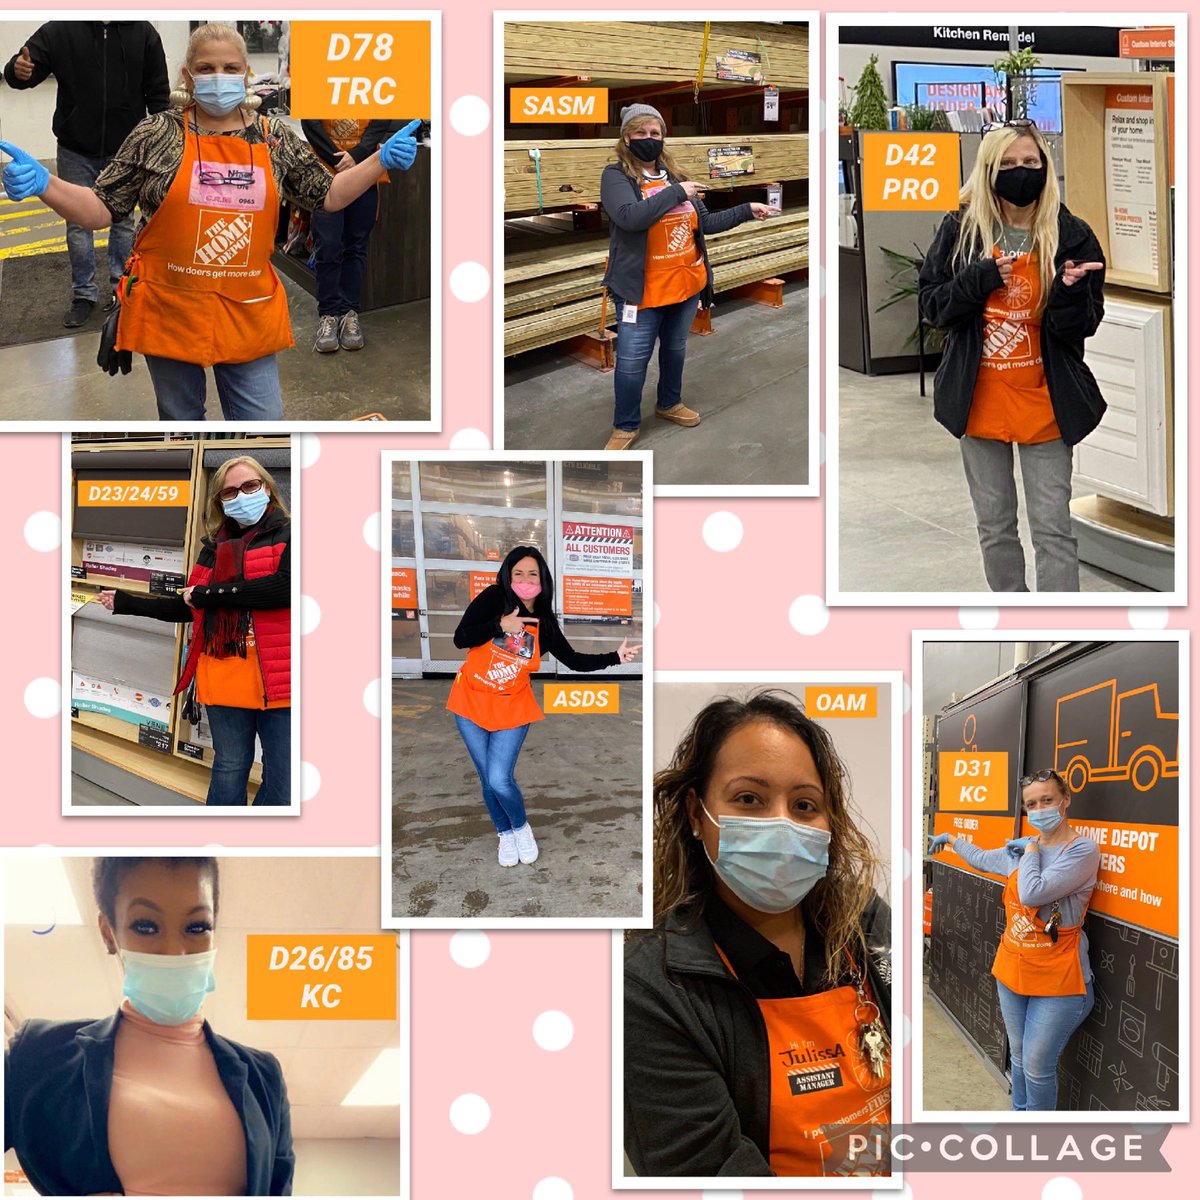 Day 1 Women in History Month: Week 1 is “Women of Home Depot”. I would like to introduce the women in leadership of 0965: Julissa, OPS ASM, Krystyne, SASM, DH’s Nina D78, Sue D31, Nora D23/24/59, Lisa D42, Danielle ASDS and Iesha D26/85. @@snezana_stajic @hdieshab @dmd62607